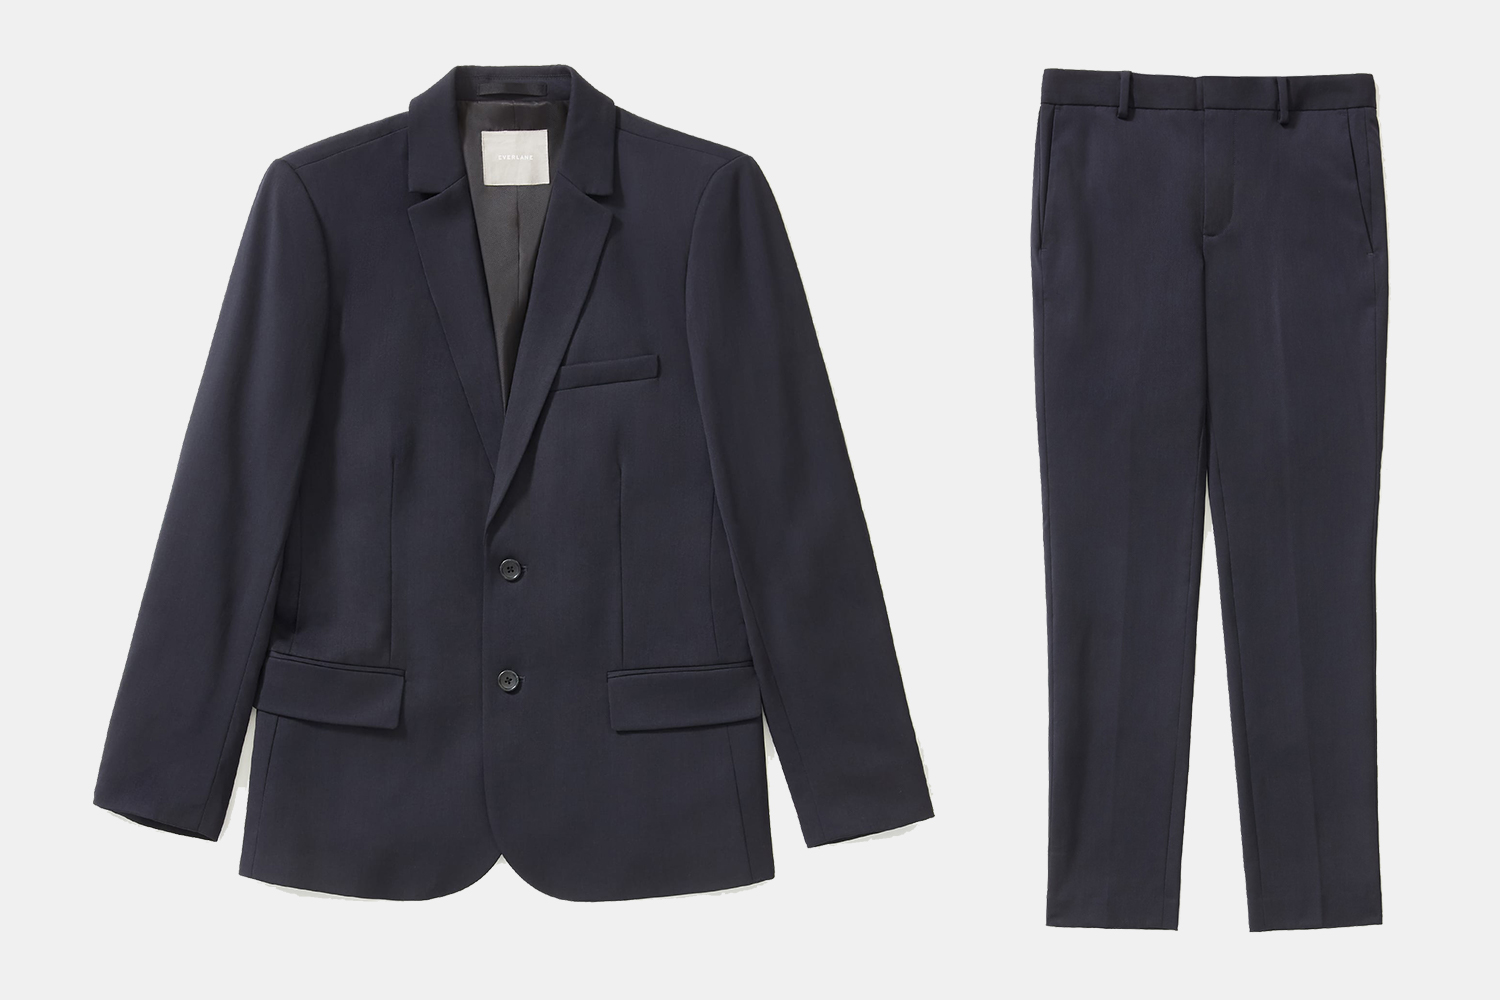 The men's Italian wool suit from Everlane on a grey background, including the suit jacket on the left and the trousers on the right